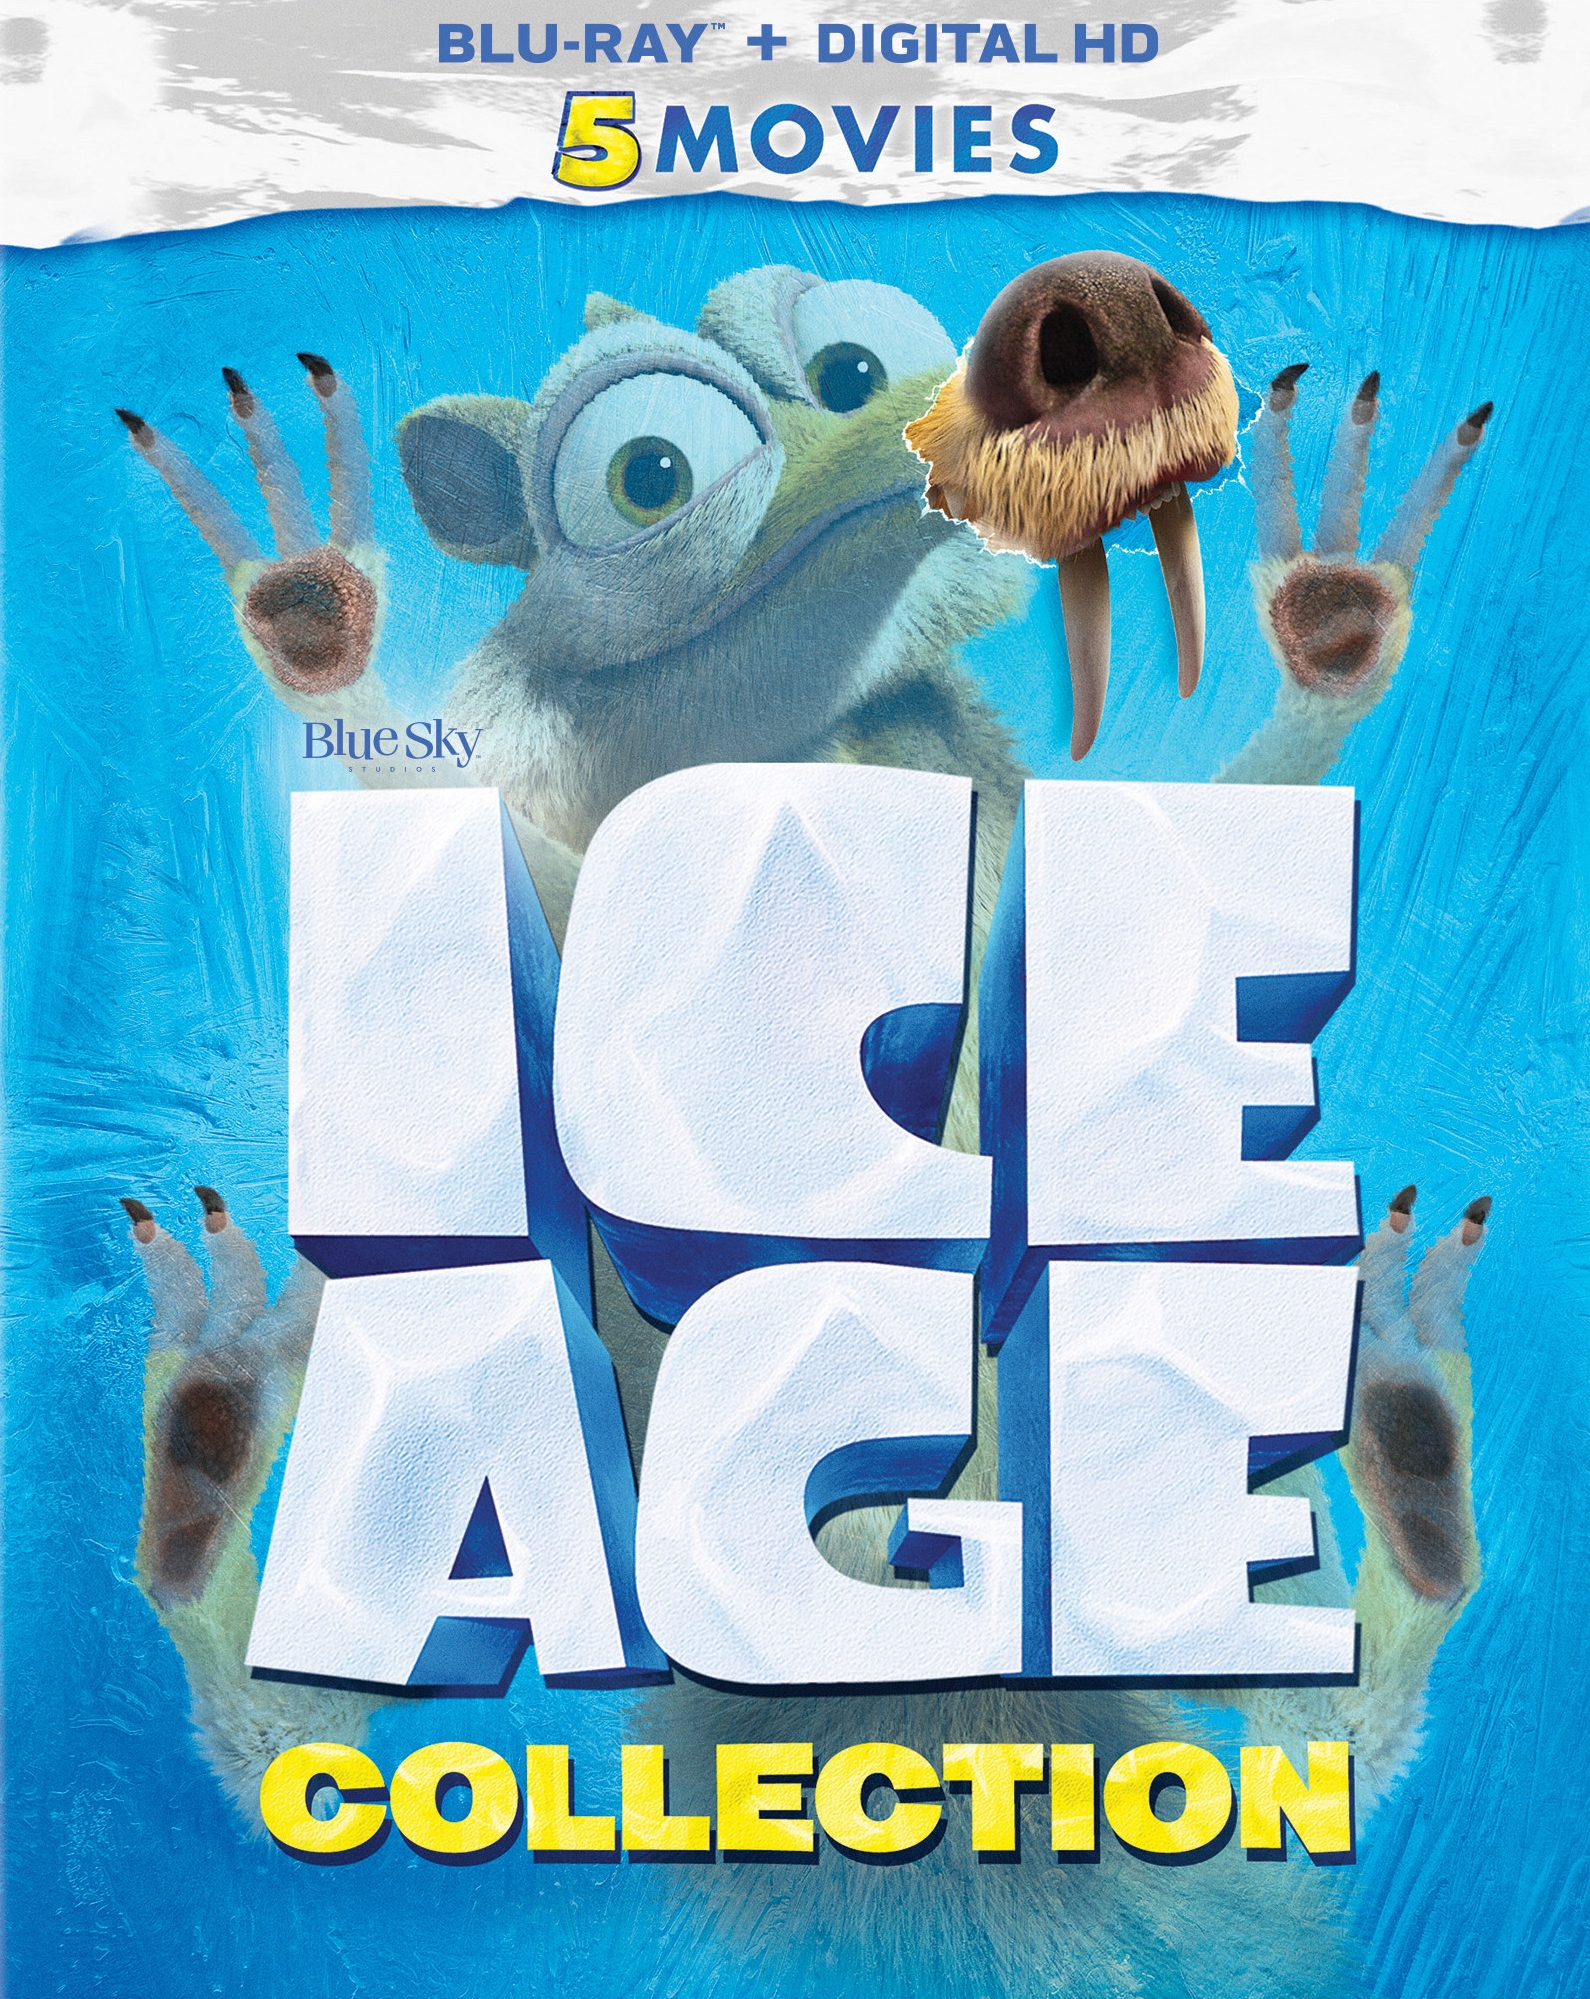 Ice Age 5 Movie Collection Includes Digital Copy Blu Ray 5 Discs Best Buy